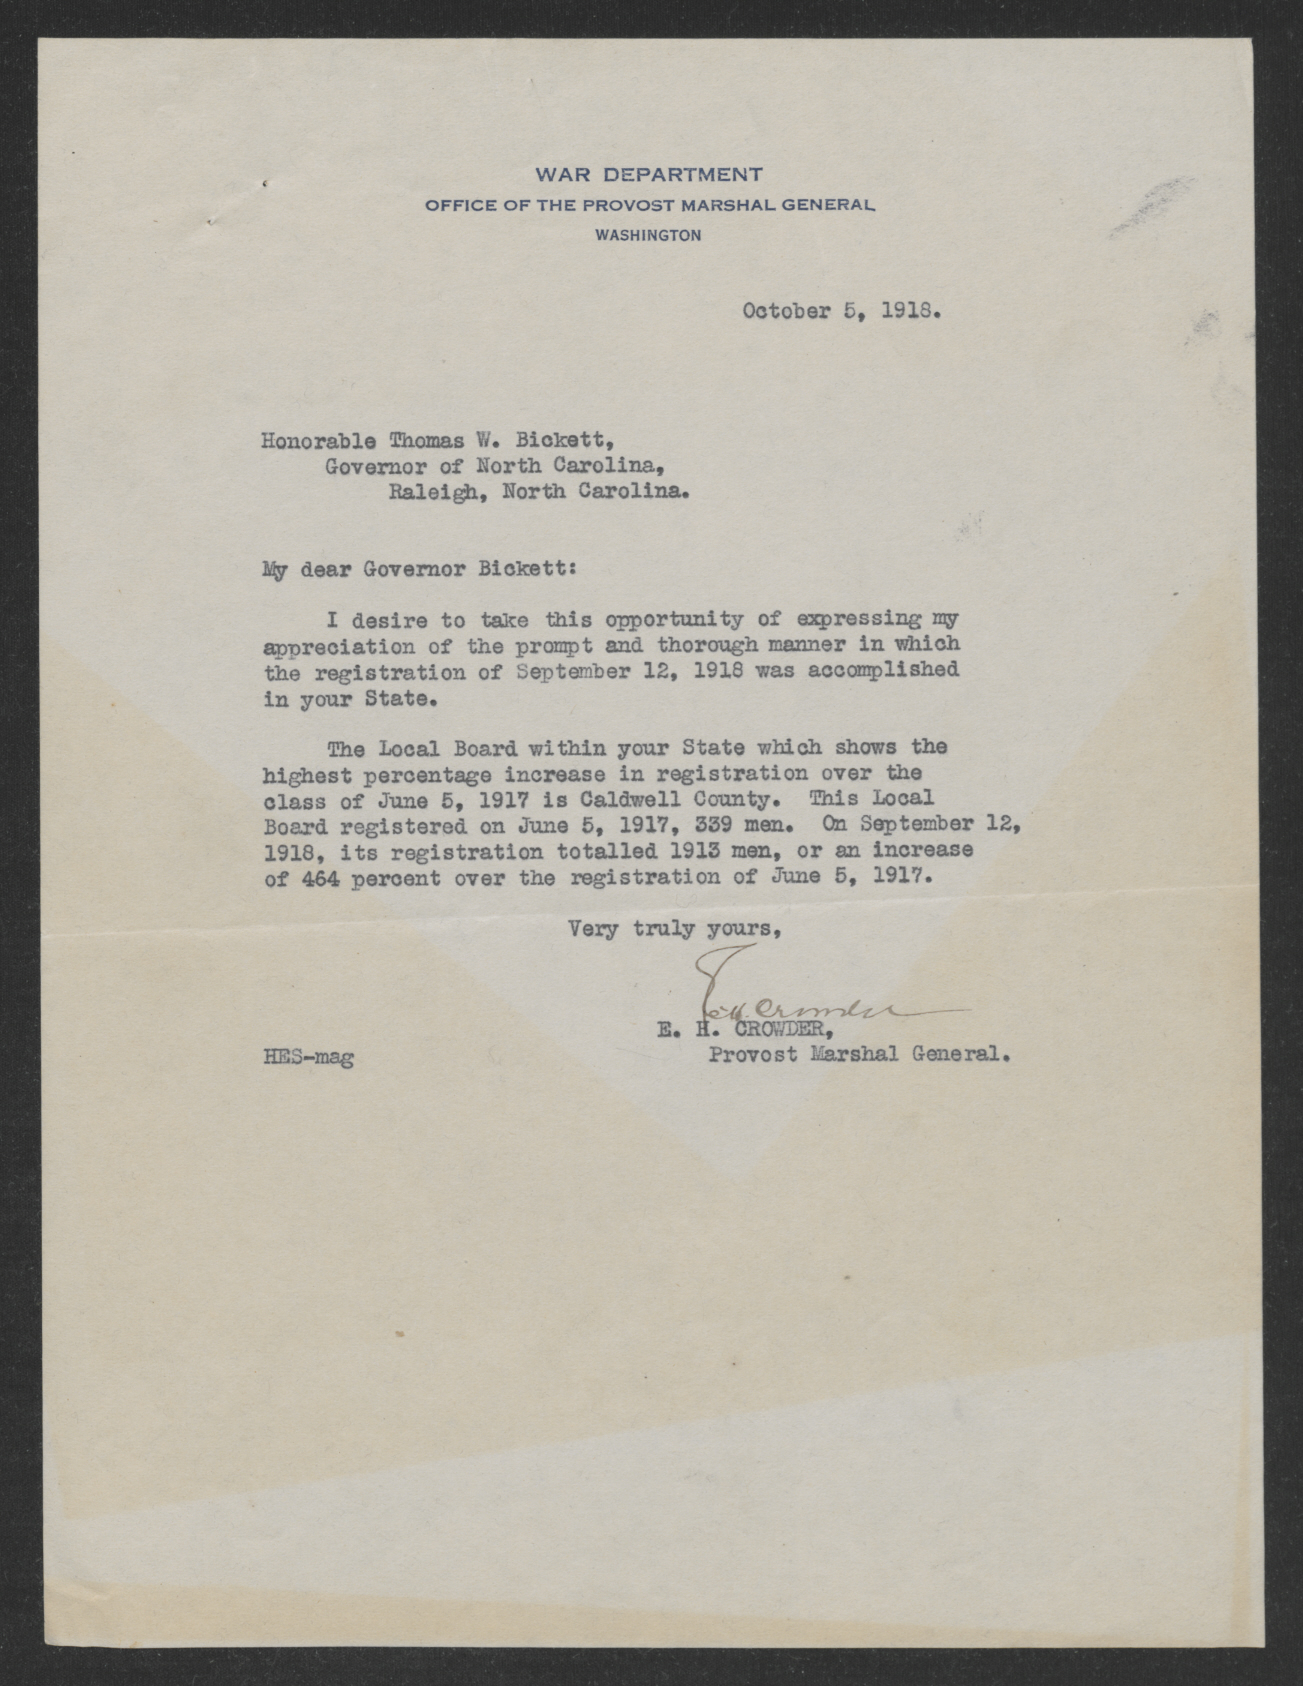 Letter from Enoch H. Crowder to Thomas W. Bickett, October 5, 1918